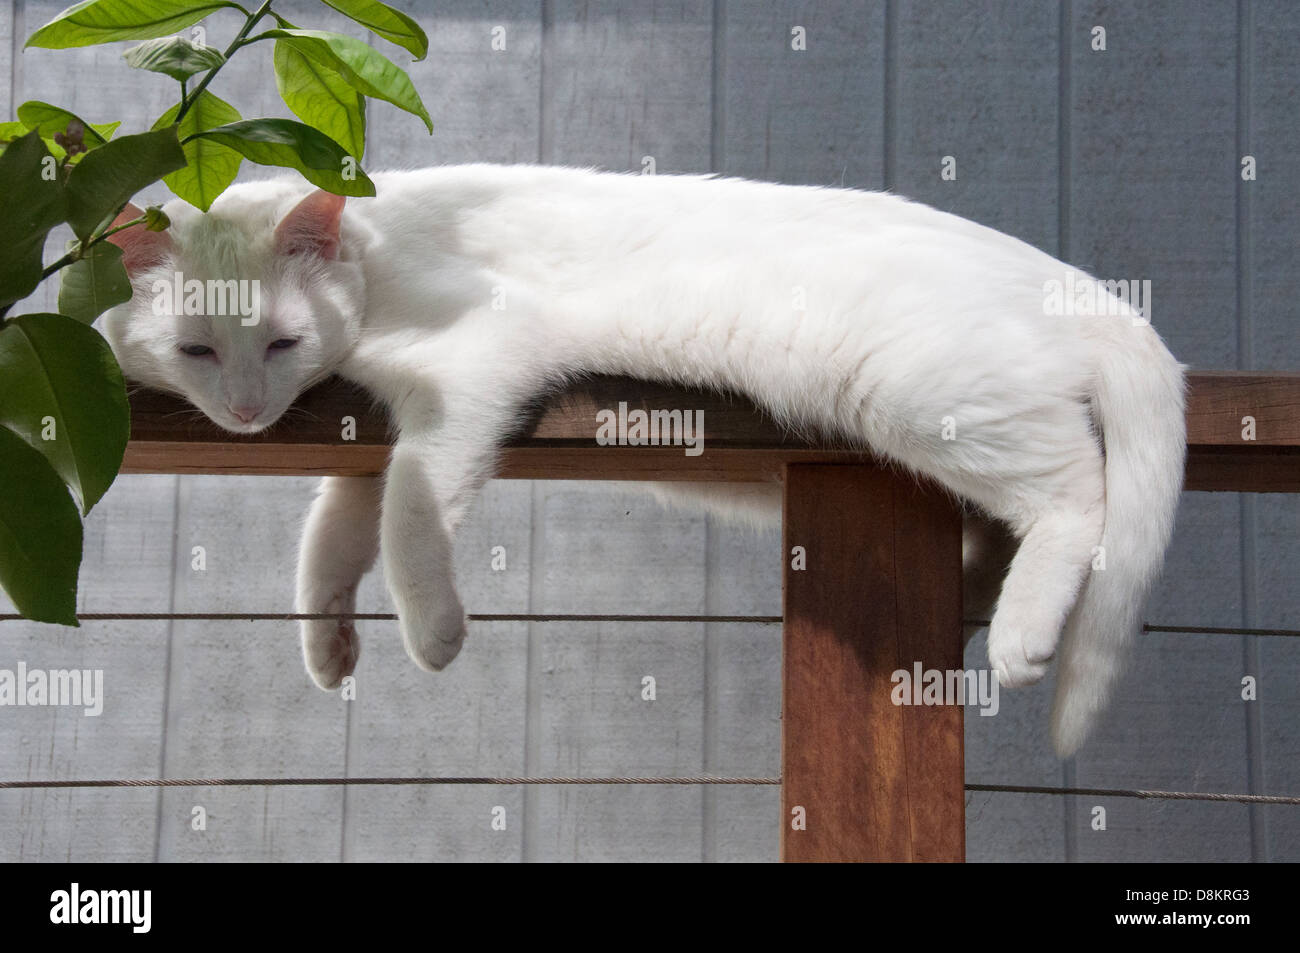 White cat lazing and chilling splay on a fence Stock Photo